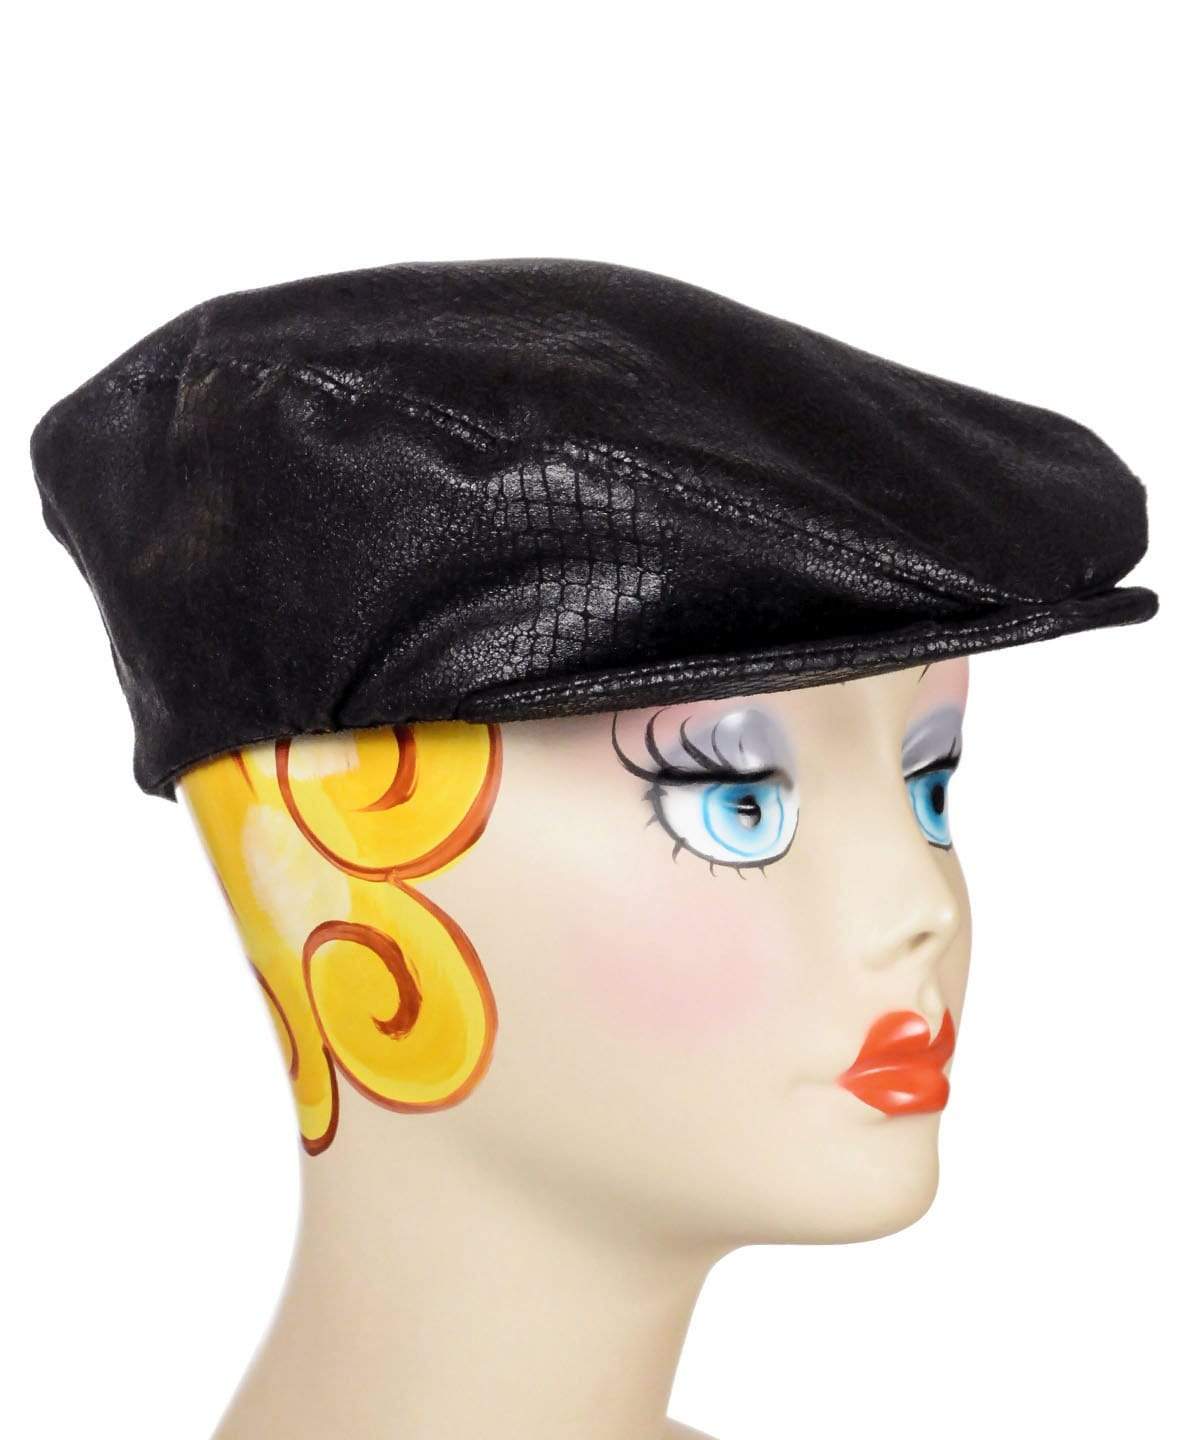 Charlie Driving Cap- Vegan Leather Outback in Black